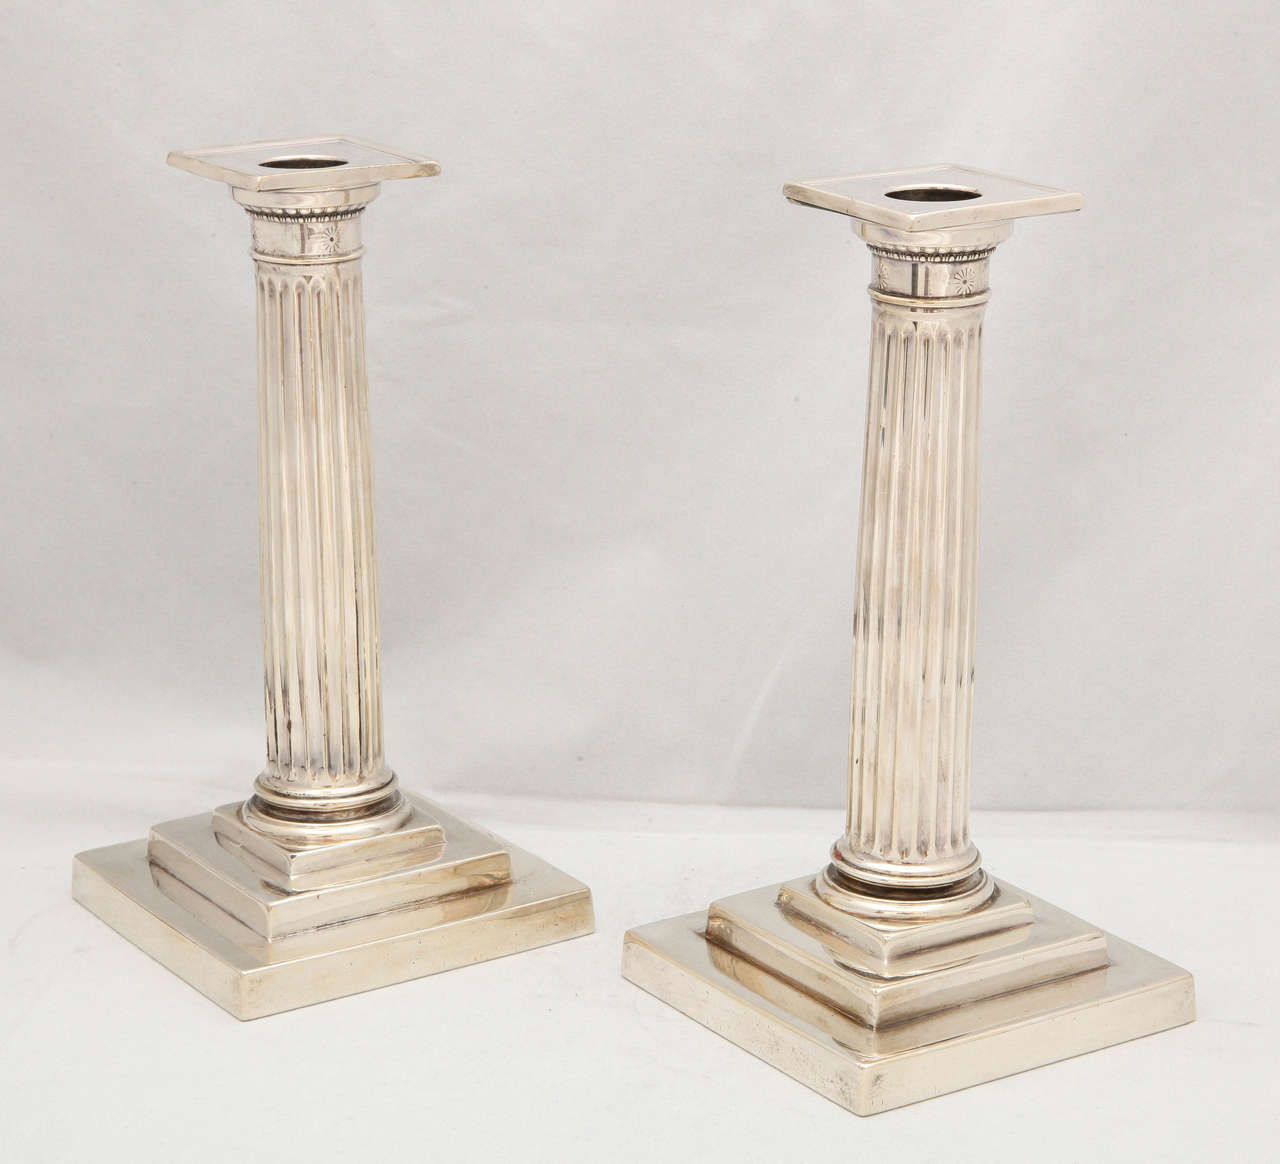 Edwardian pair of sterling silver, column-form candlesticks, The Gorham Corp., Providence, Rhode Island, year marked for 1908. Lovely etched rosettes around 